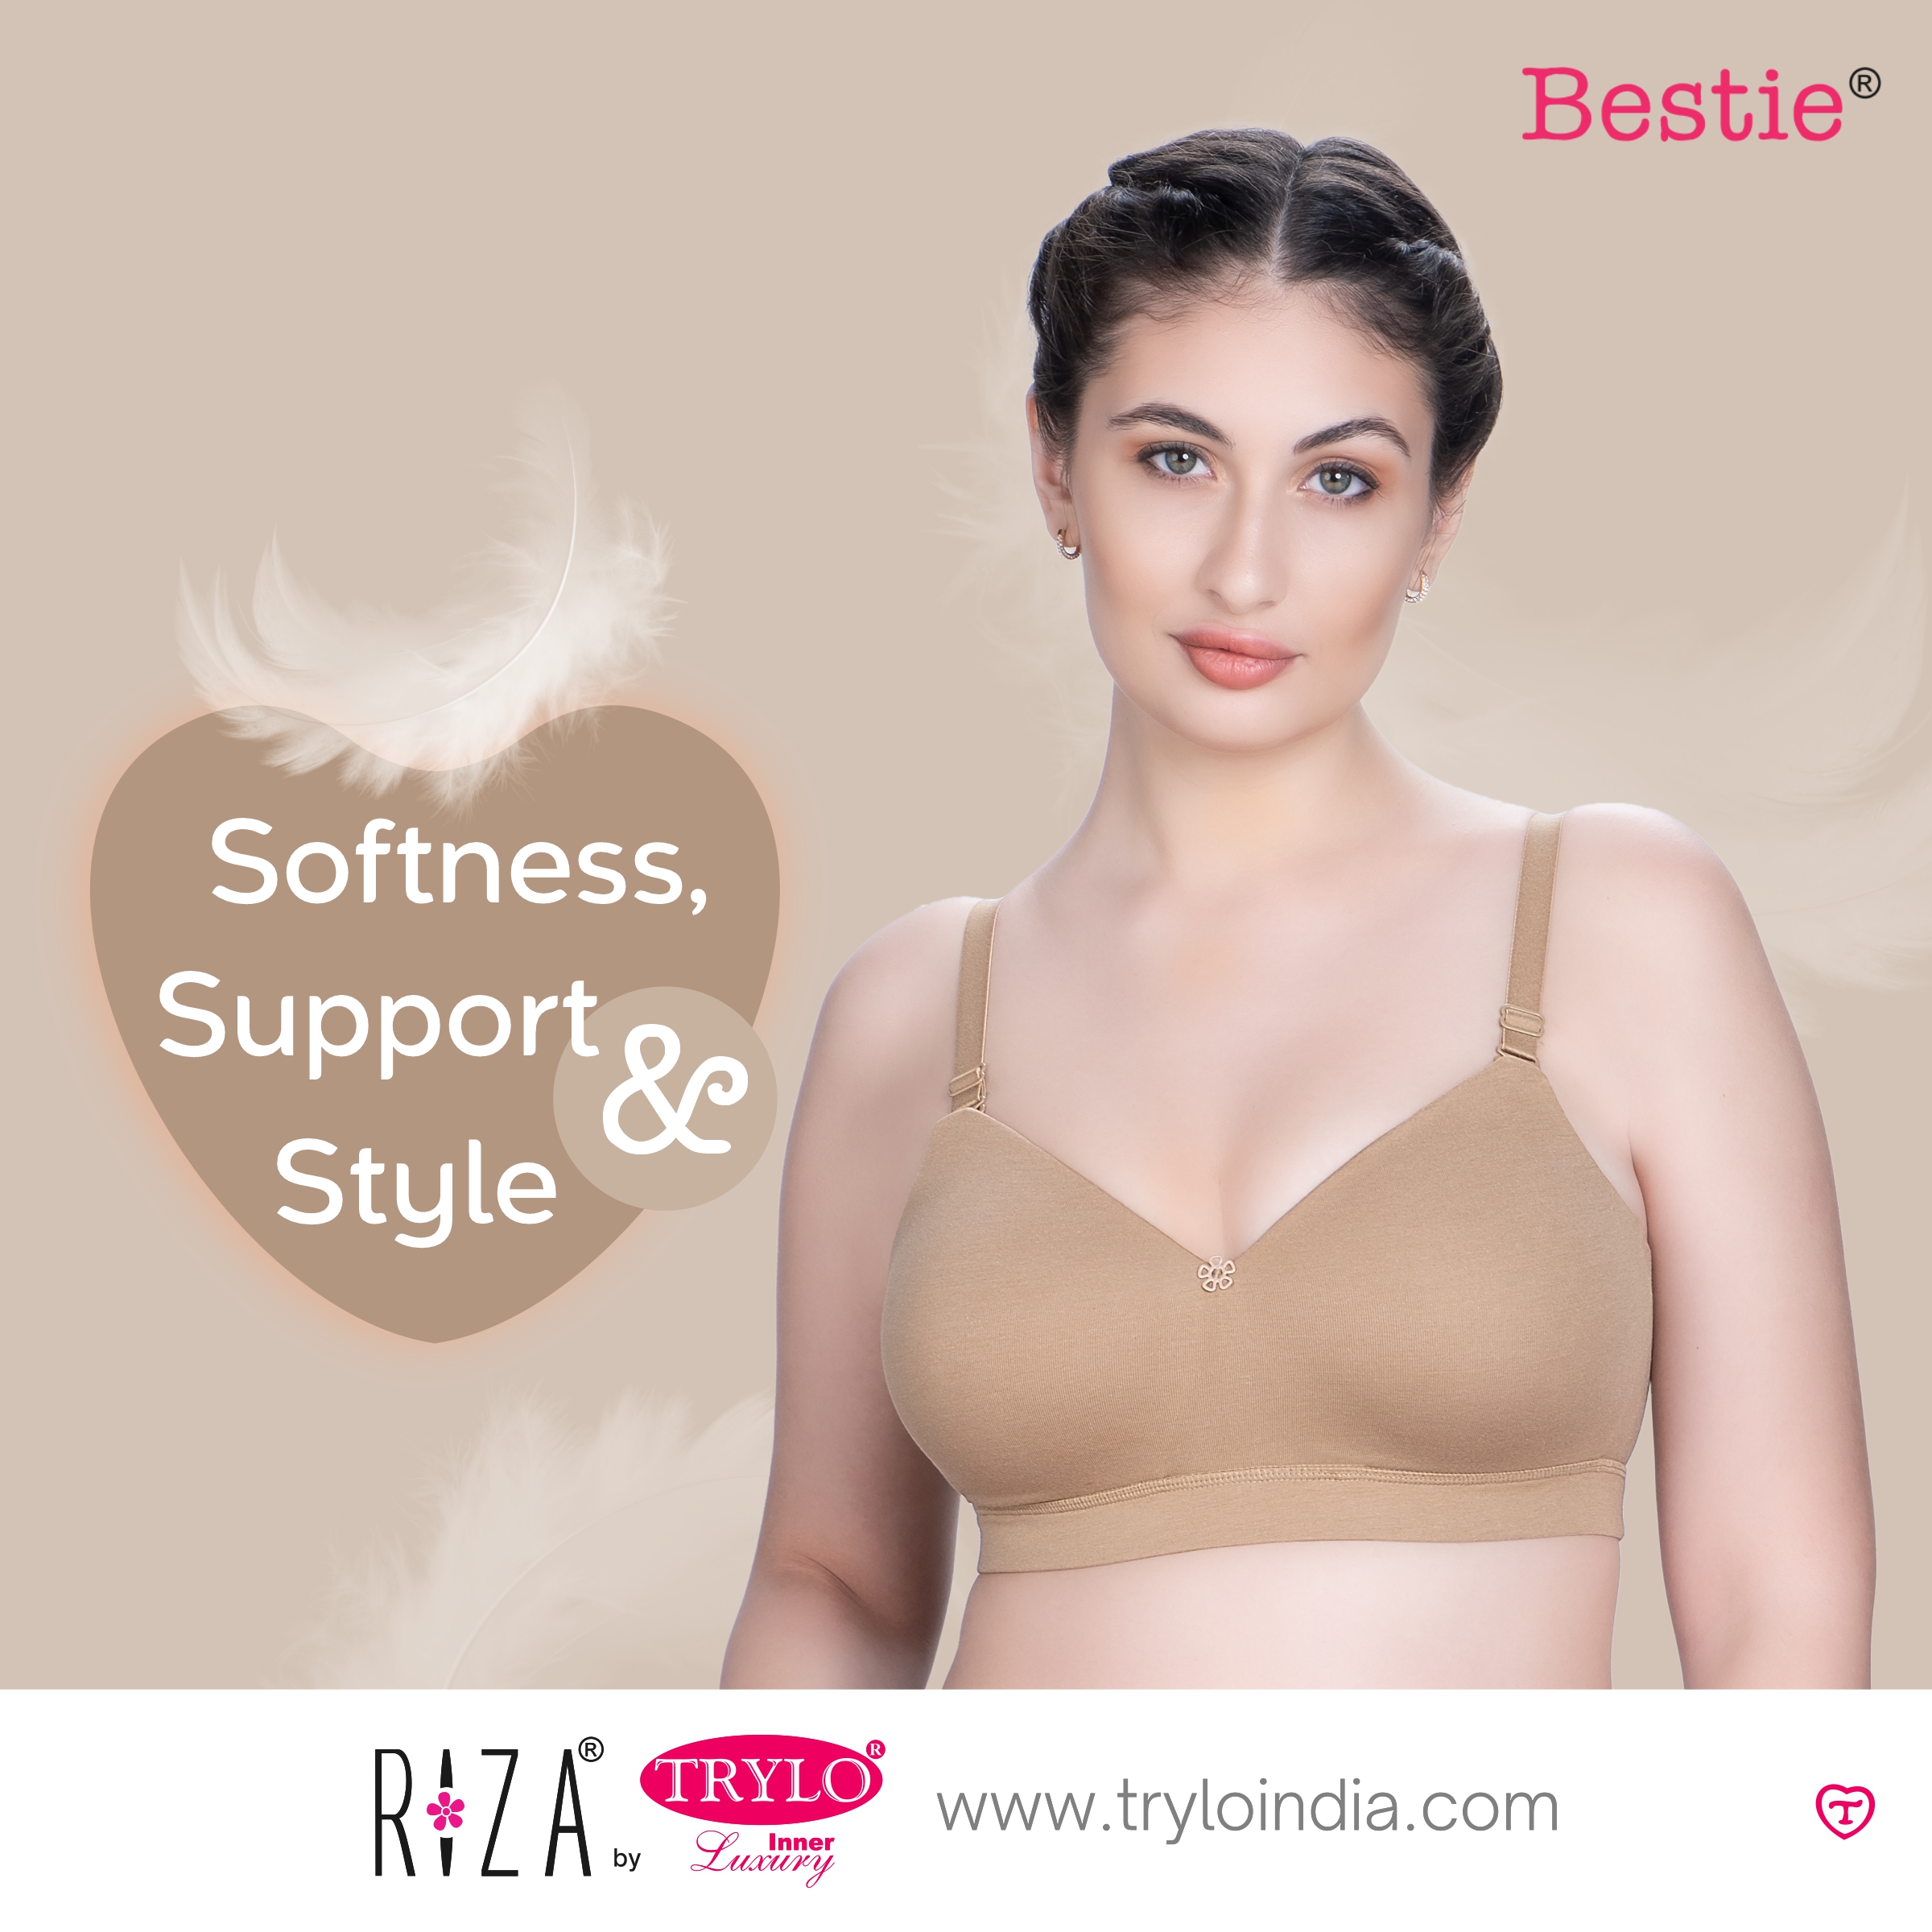 Trylo Intimates on X: Who says you can't have it all? Riza Bestie